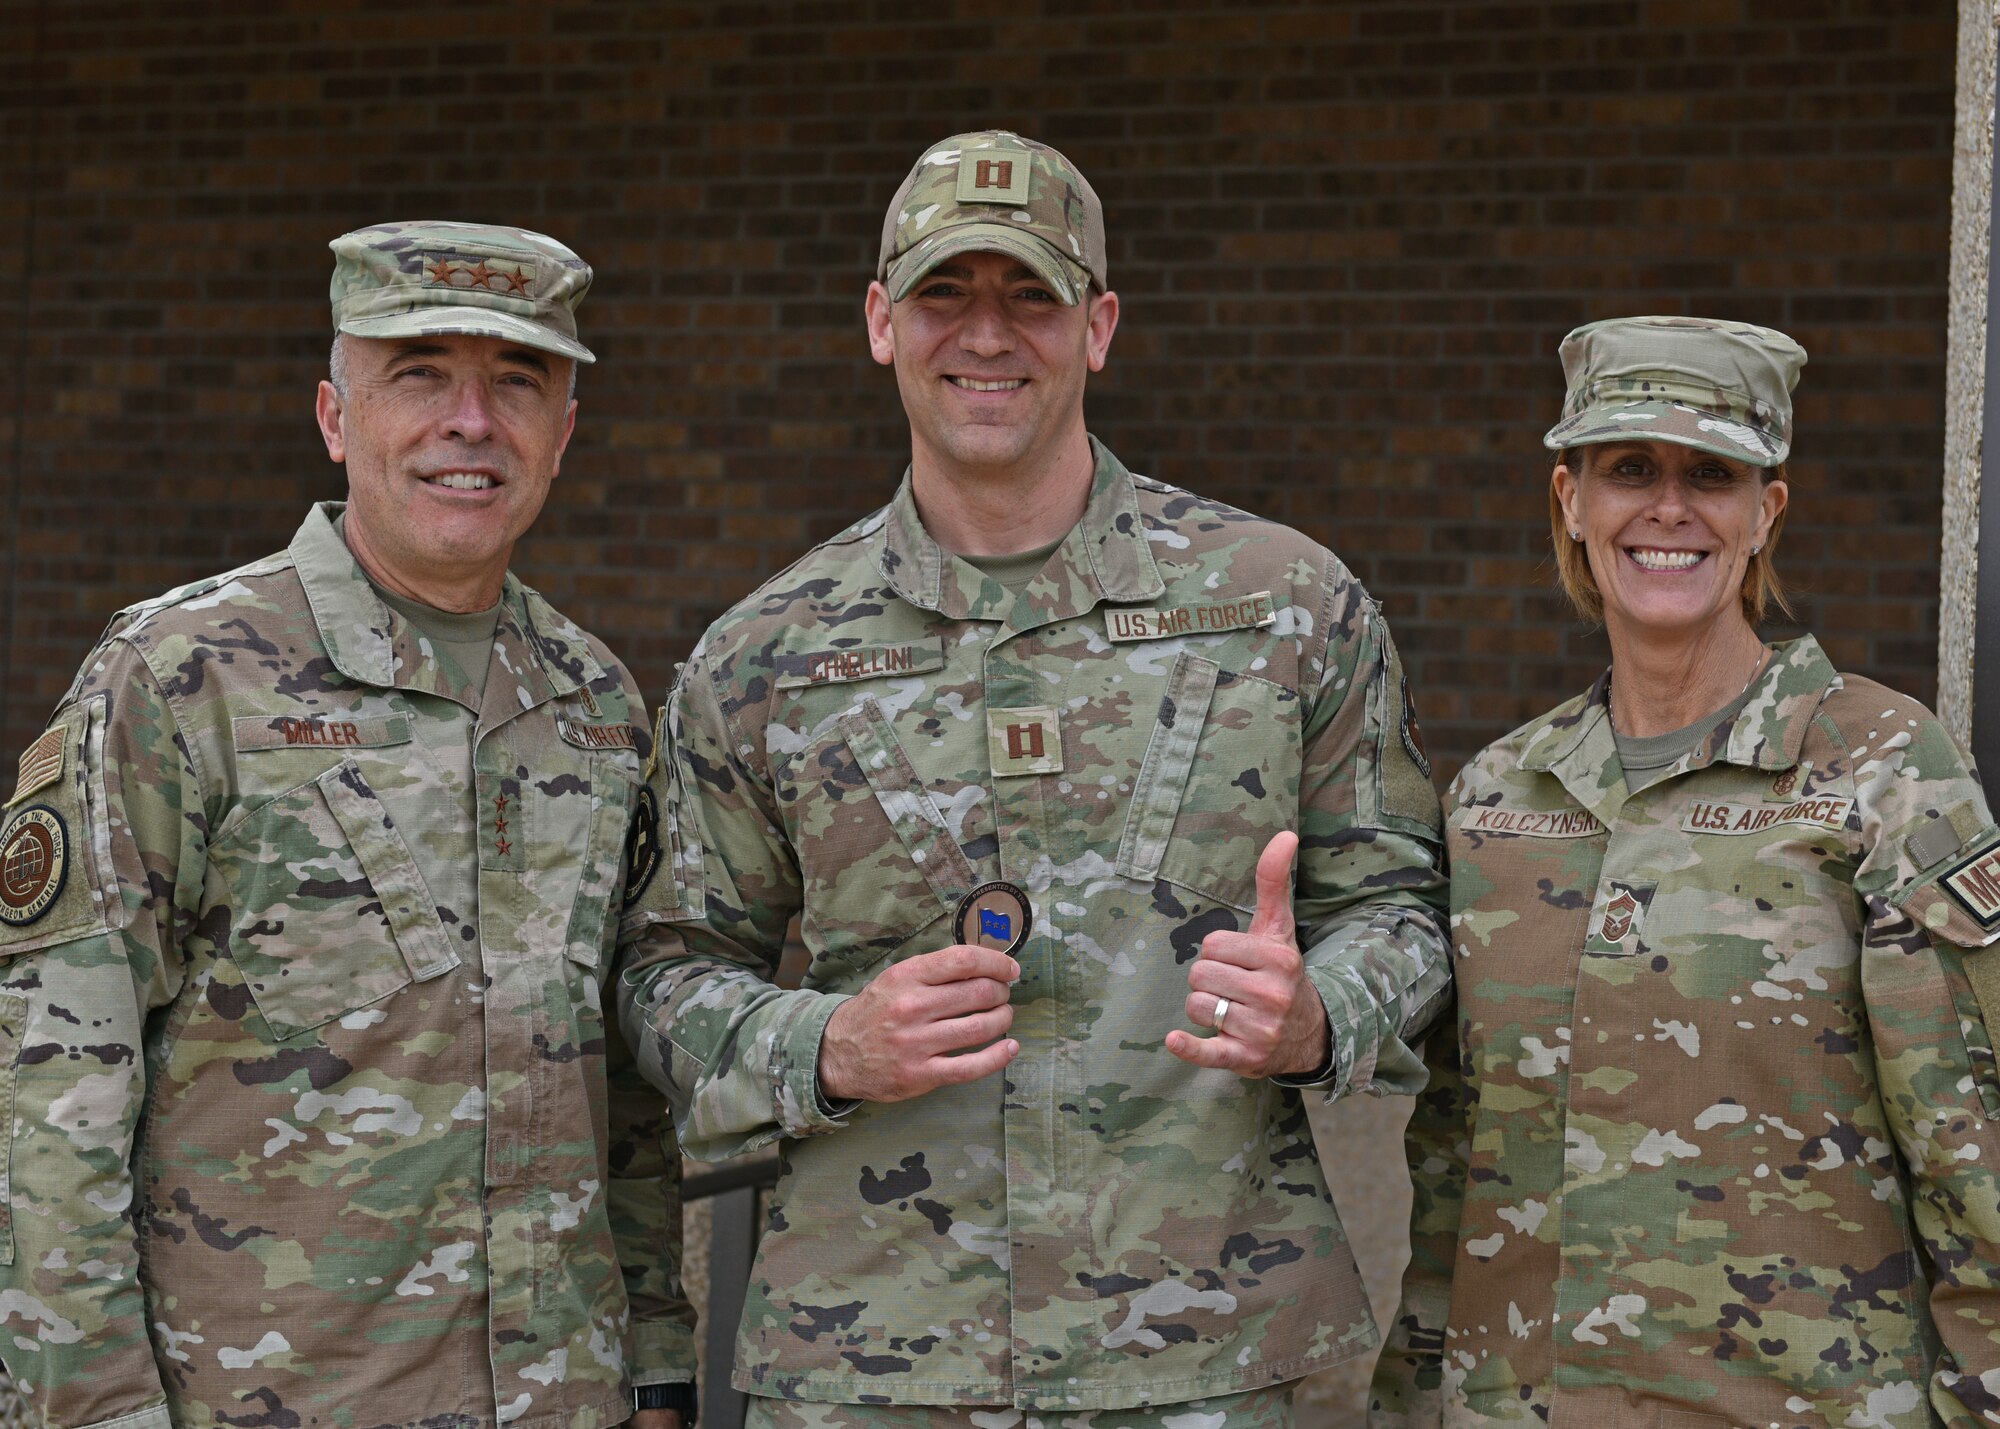 U.S. Air Force Surgeon General Lt. Gen. Robert Miller; Chief Master Sgt. Dawn Kolczynski, Chief, Medical Enlisted Force and Enlisted Corps Chief; and Capt. Caleb Chiellini, 17th Medical Group laboratory flight commander; pose for a photo at Goodfellow Air Force Base, Texas, April 26, 2022. Chiellini was coined for his exceptional work and dedication to his job as a 17th MDG Airman. (U.S. Air Force photo by Senior Airman Ashley Thrash)